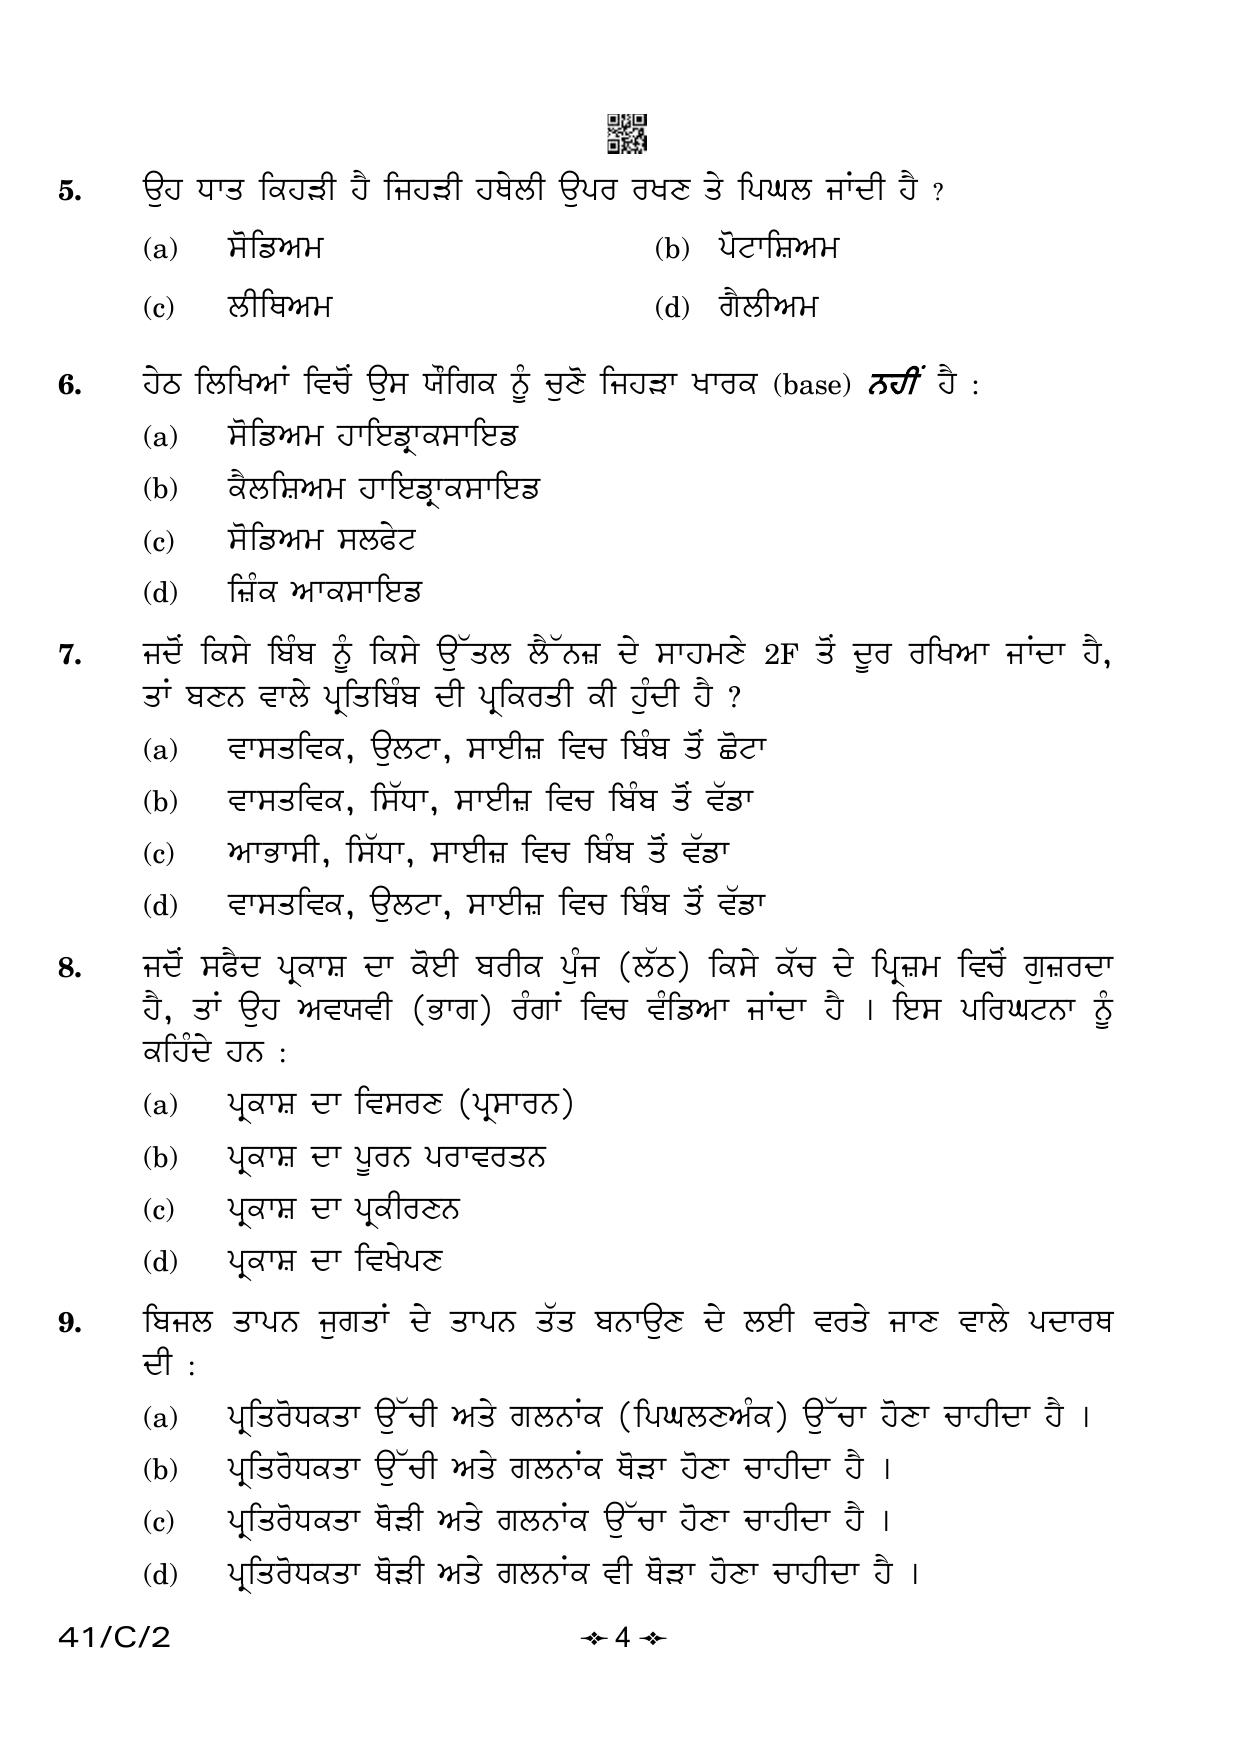 CBSE Class 10 41-2 Science Punjabi 2023 (Compartment) Question Paper - Page 4